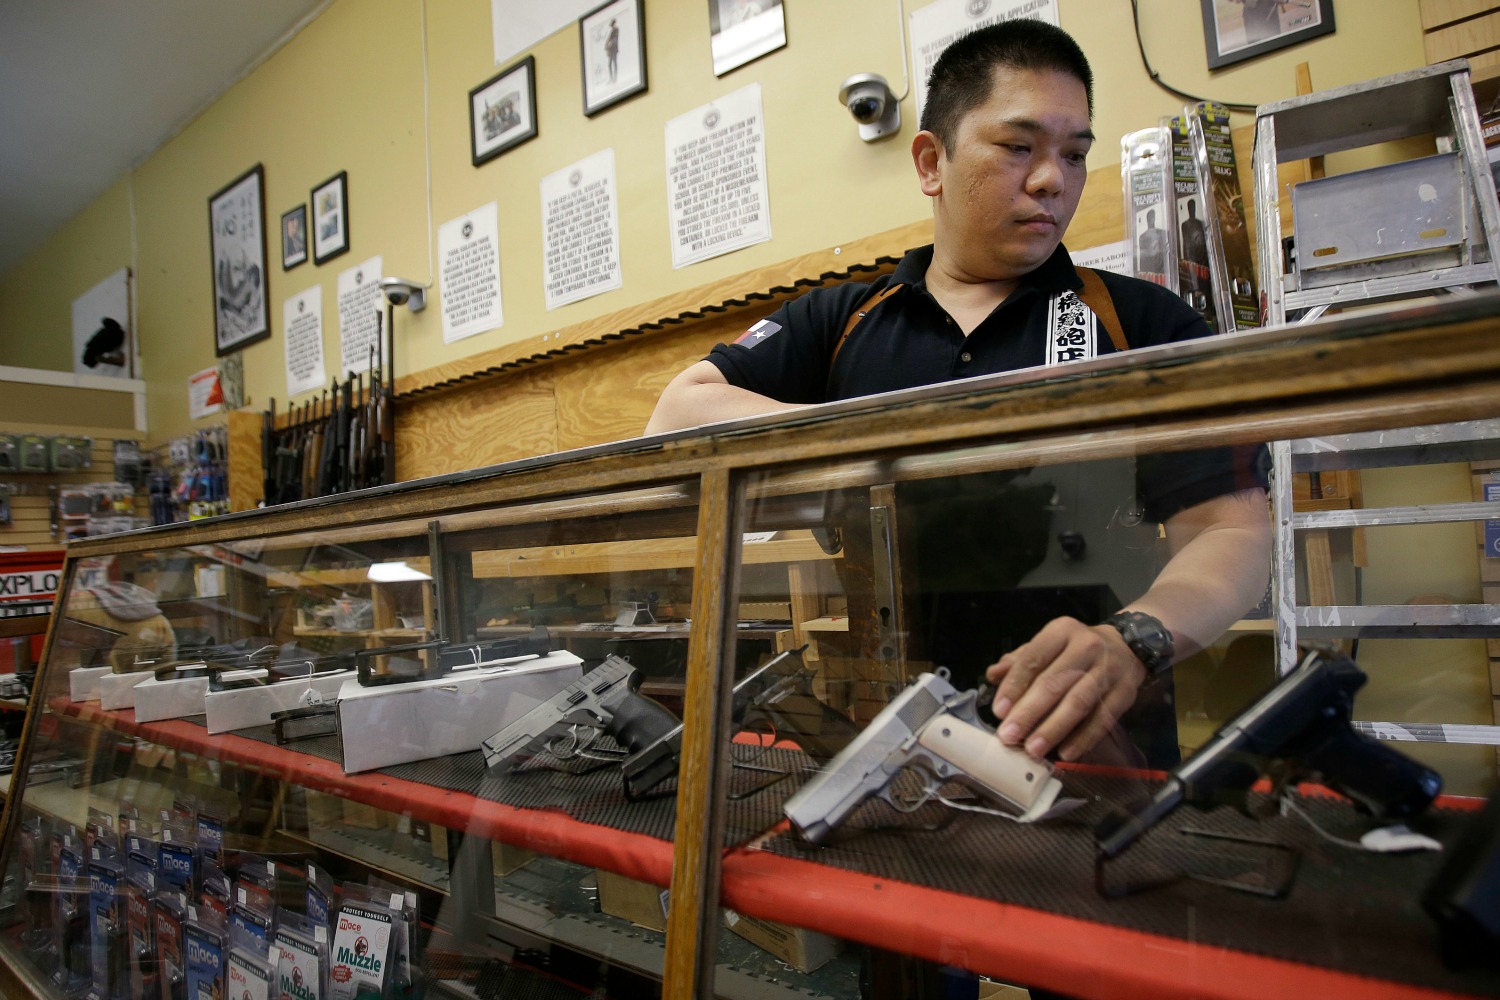 You can’t buy a gun in San Francisco anymore